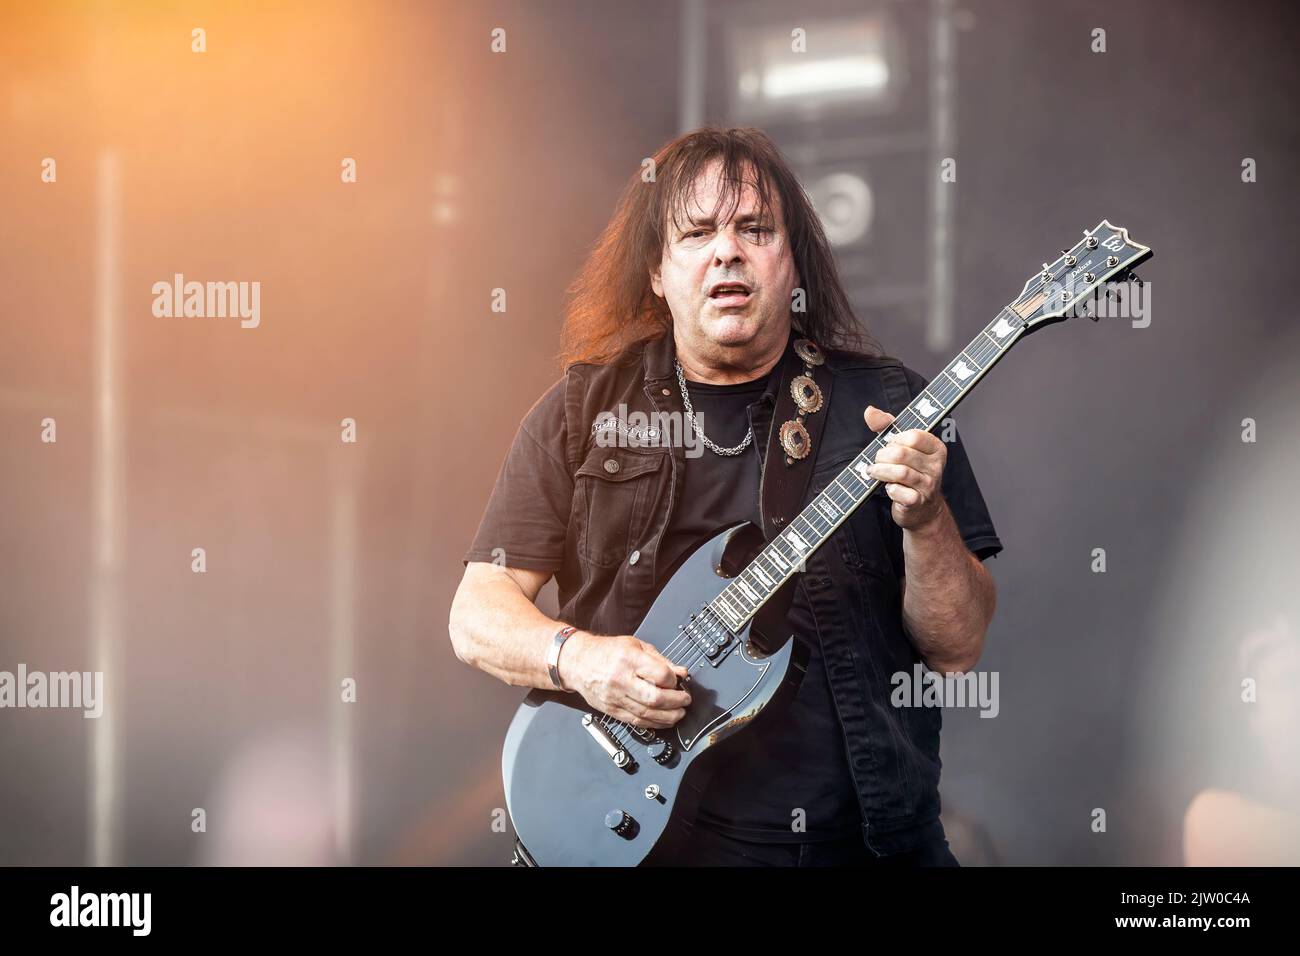 Solvesborg, Sweden. 10th, June 2022. The American guitarist and musician Ross the Boss performs a live concert during the Swedish music festival Sweden Rock Festival 2022 in Solvesborg. (Photo credit: Gonzales Photo - Terje Dokken). Stock Photo